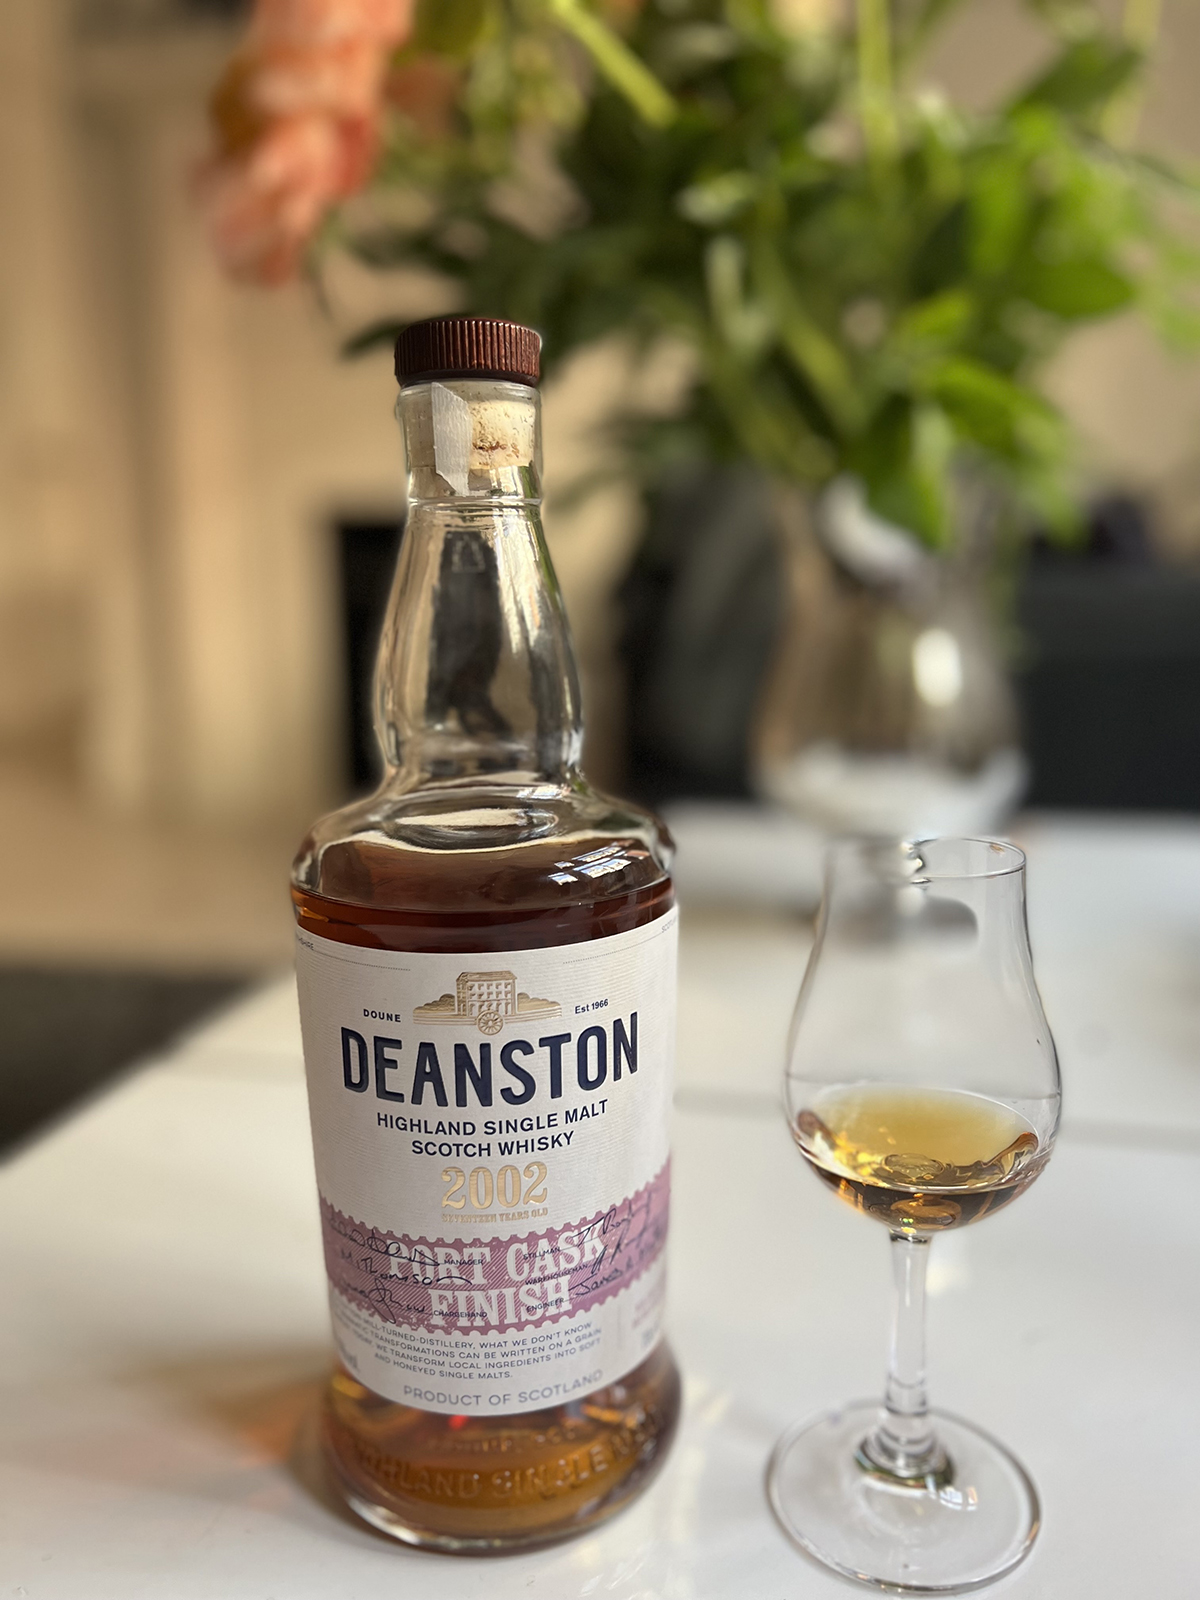 Deanston whiskey bottle with a glass of whiskey